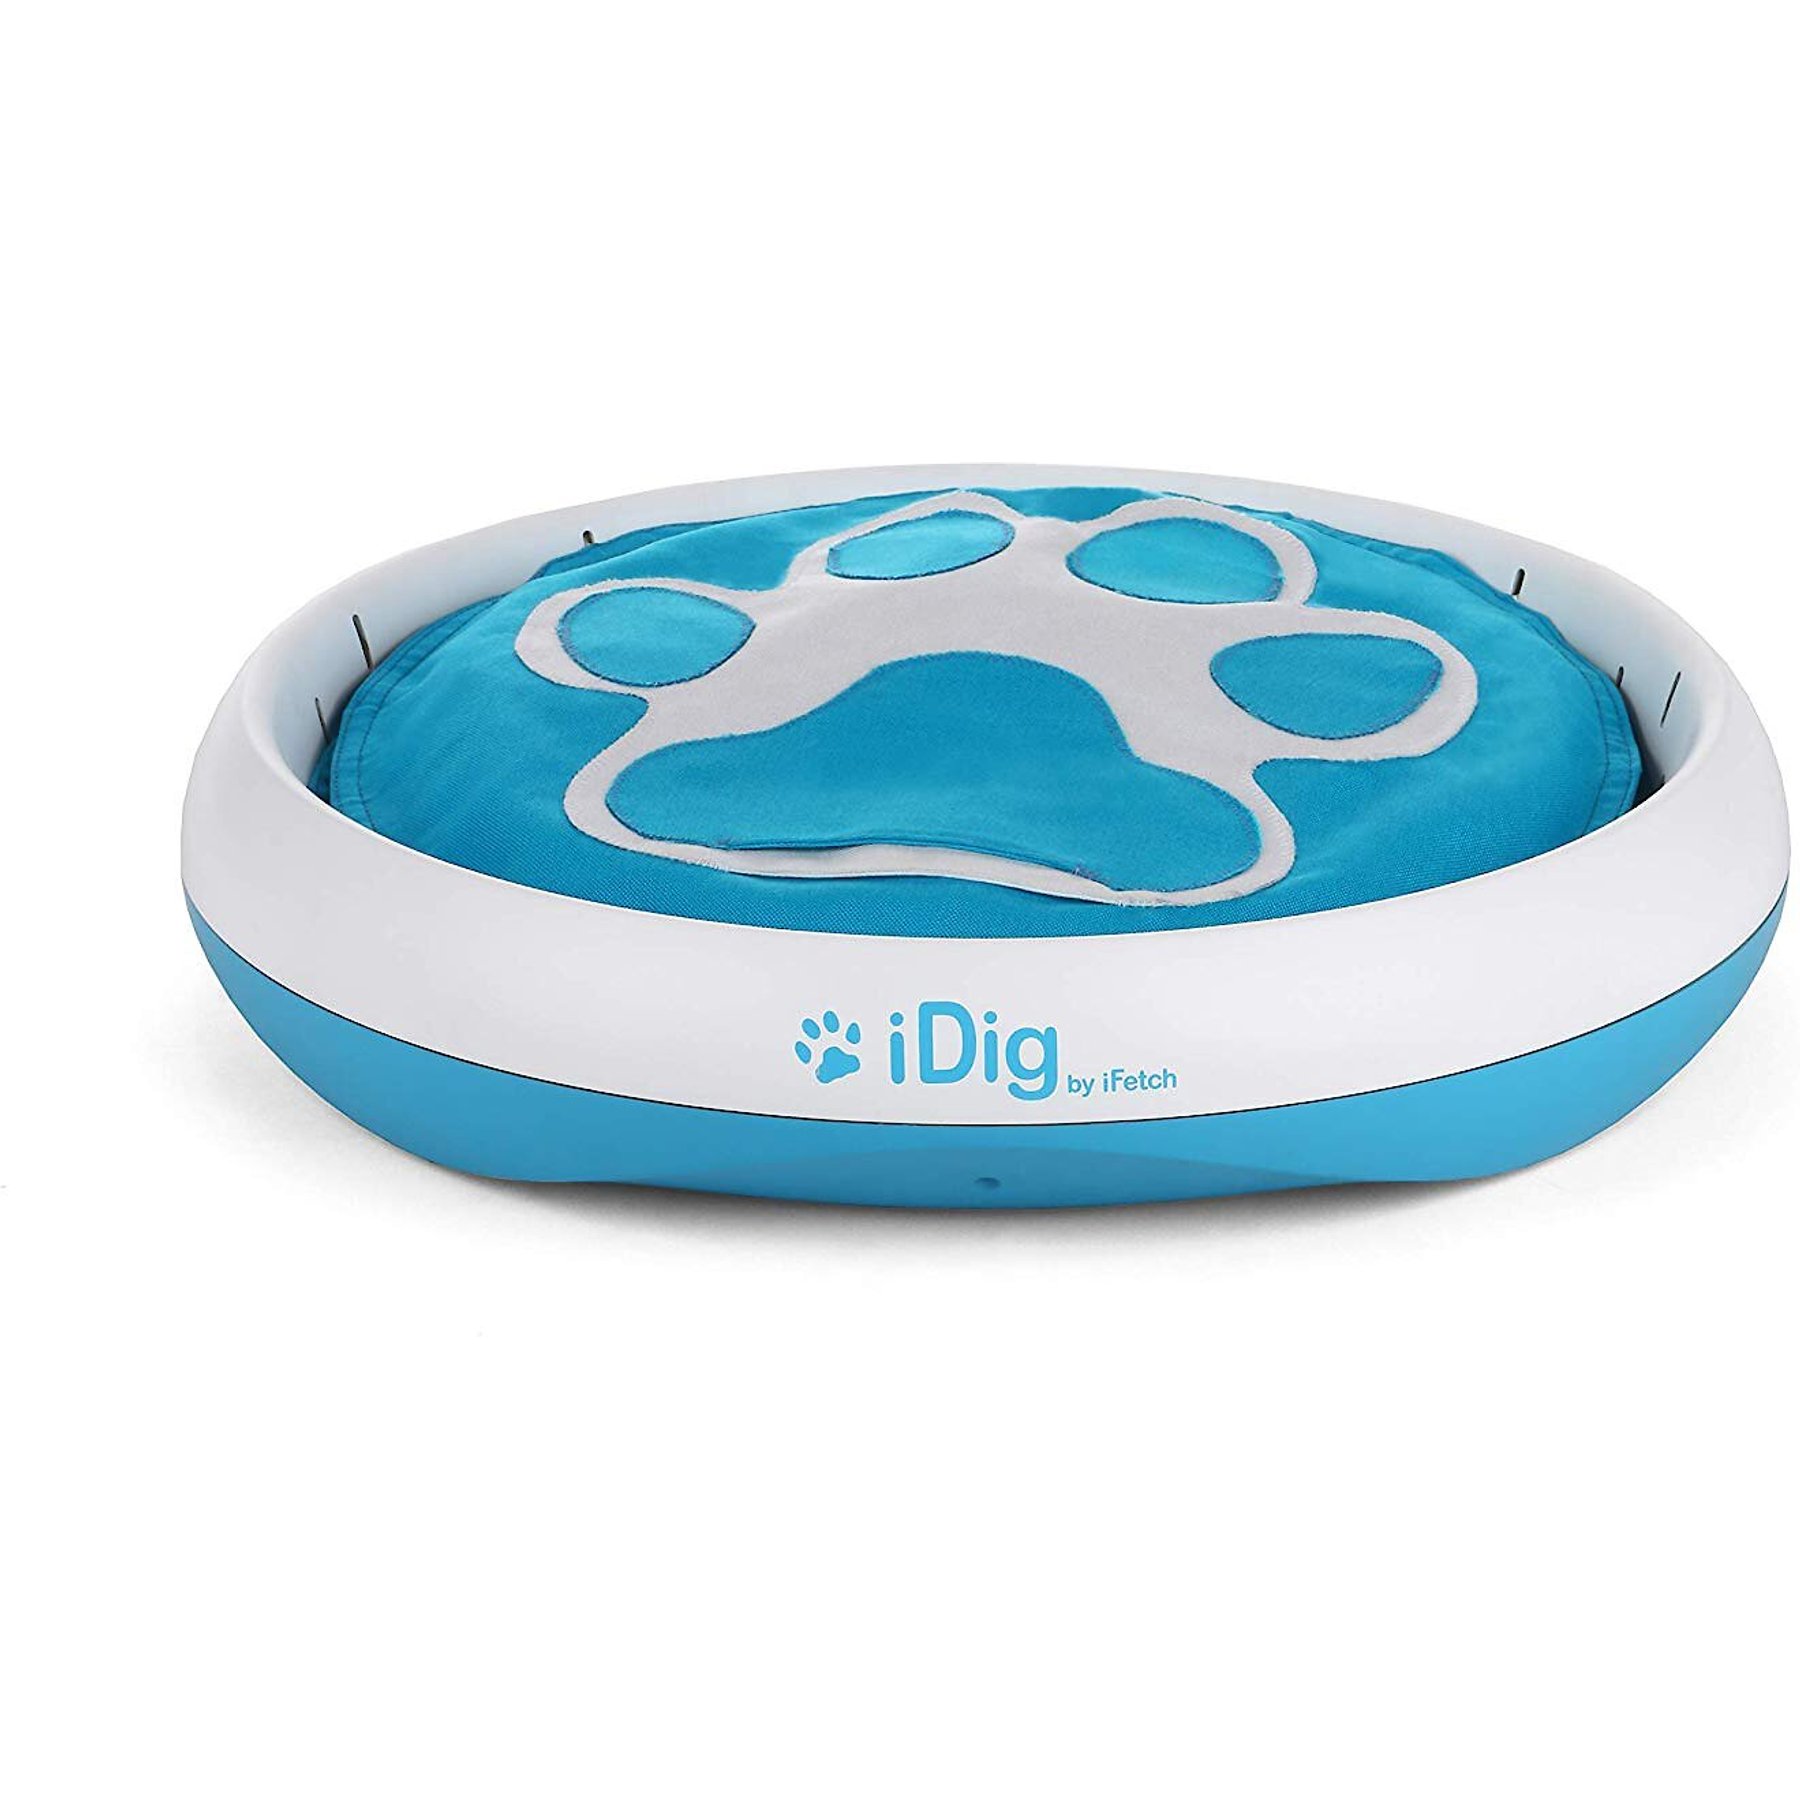 iFetch Malta - The First Ever Digging Toy. IDig Stay